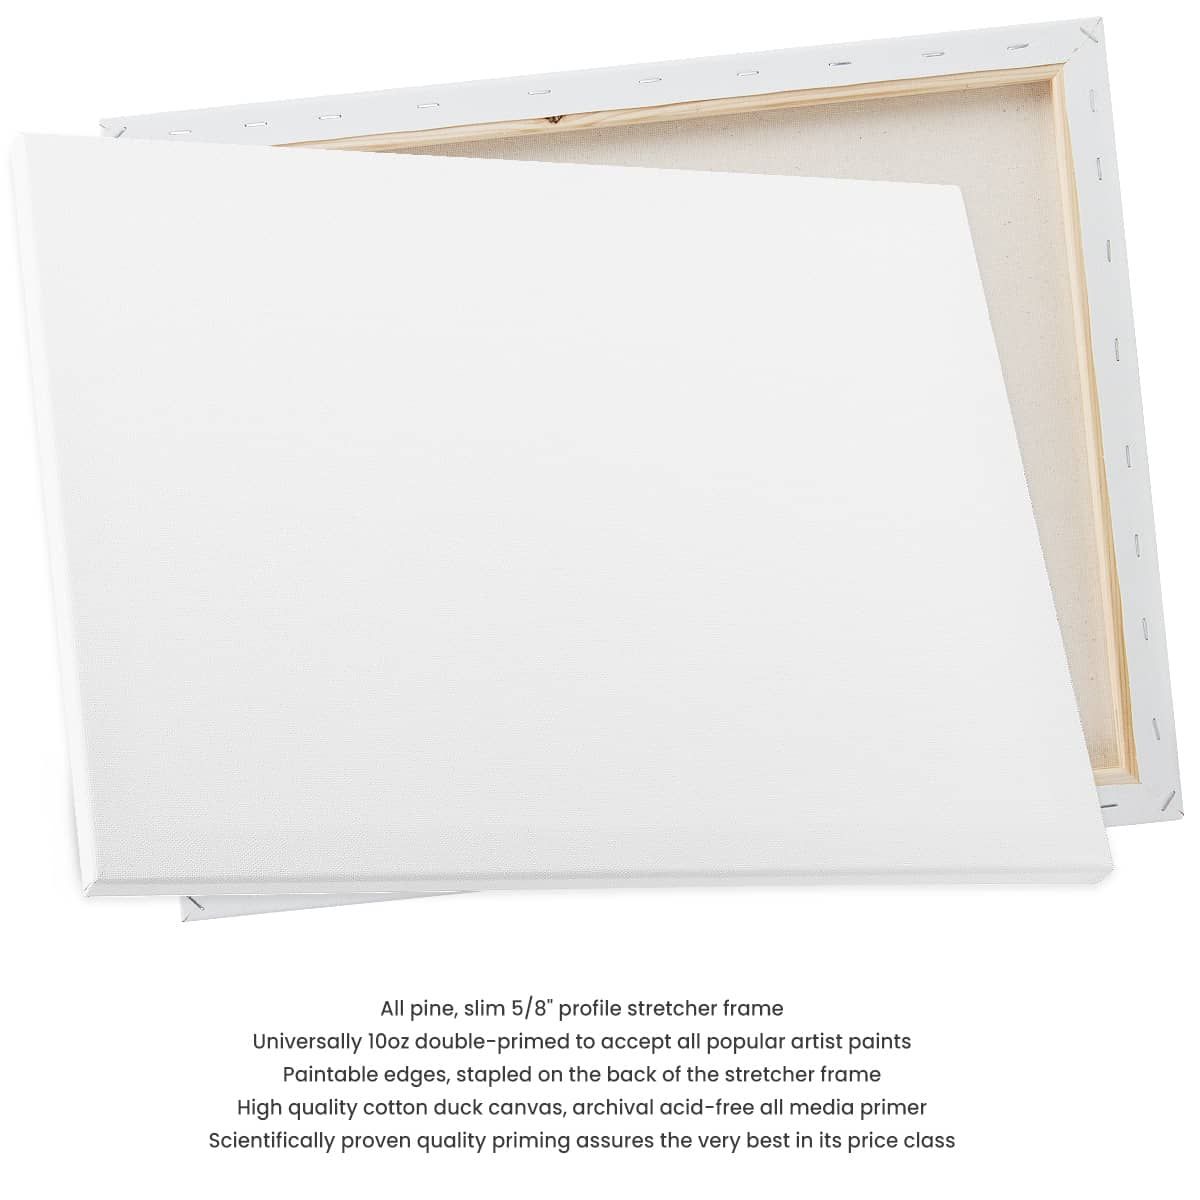 High quality cotton duck canvas, Archival acid-free all media primer